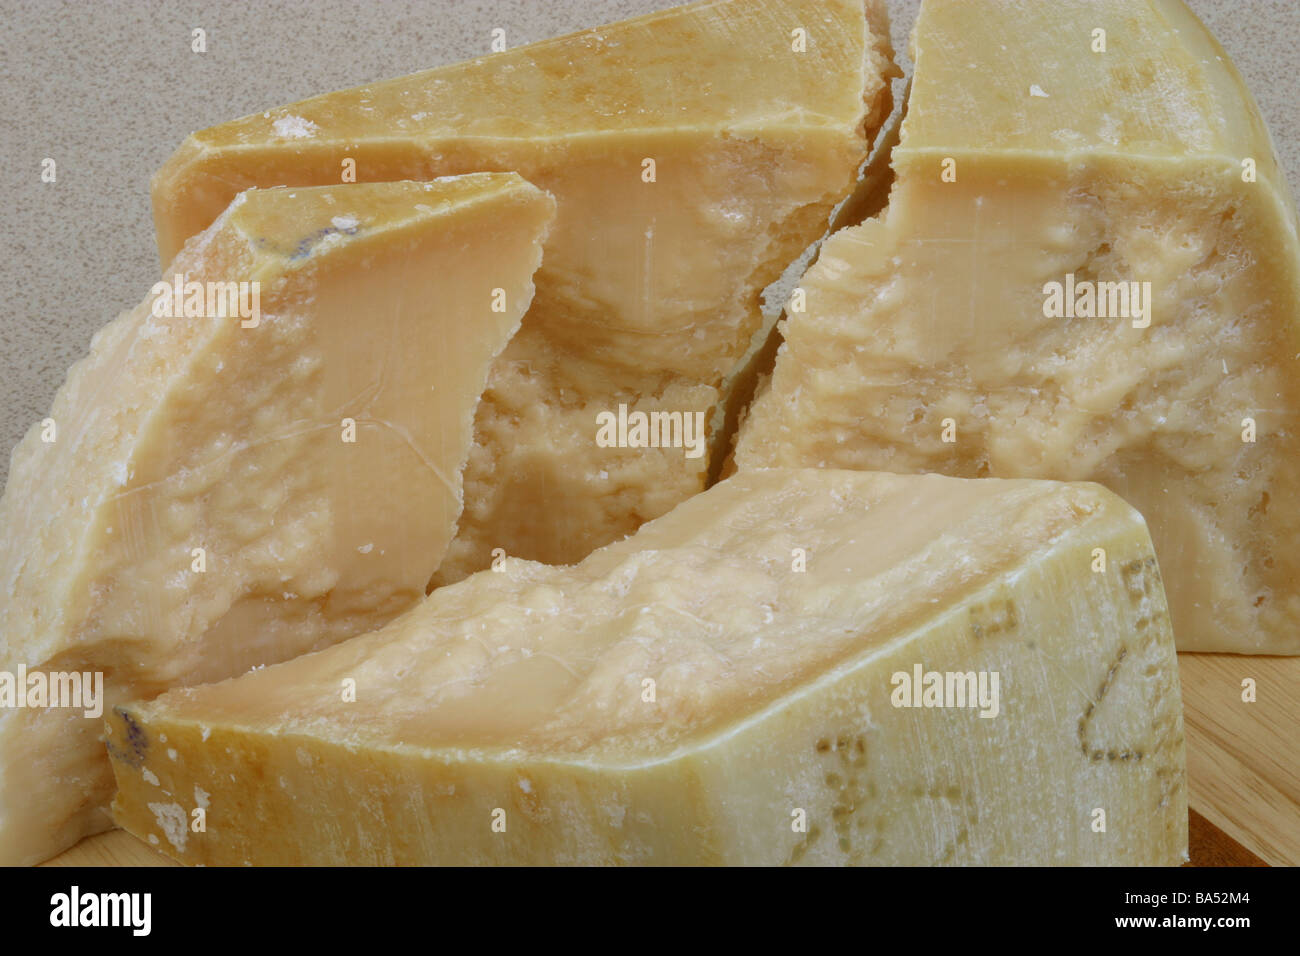 pieces of Parmesan cheese Stock Photo